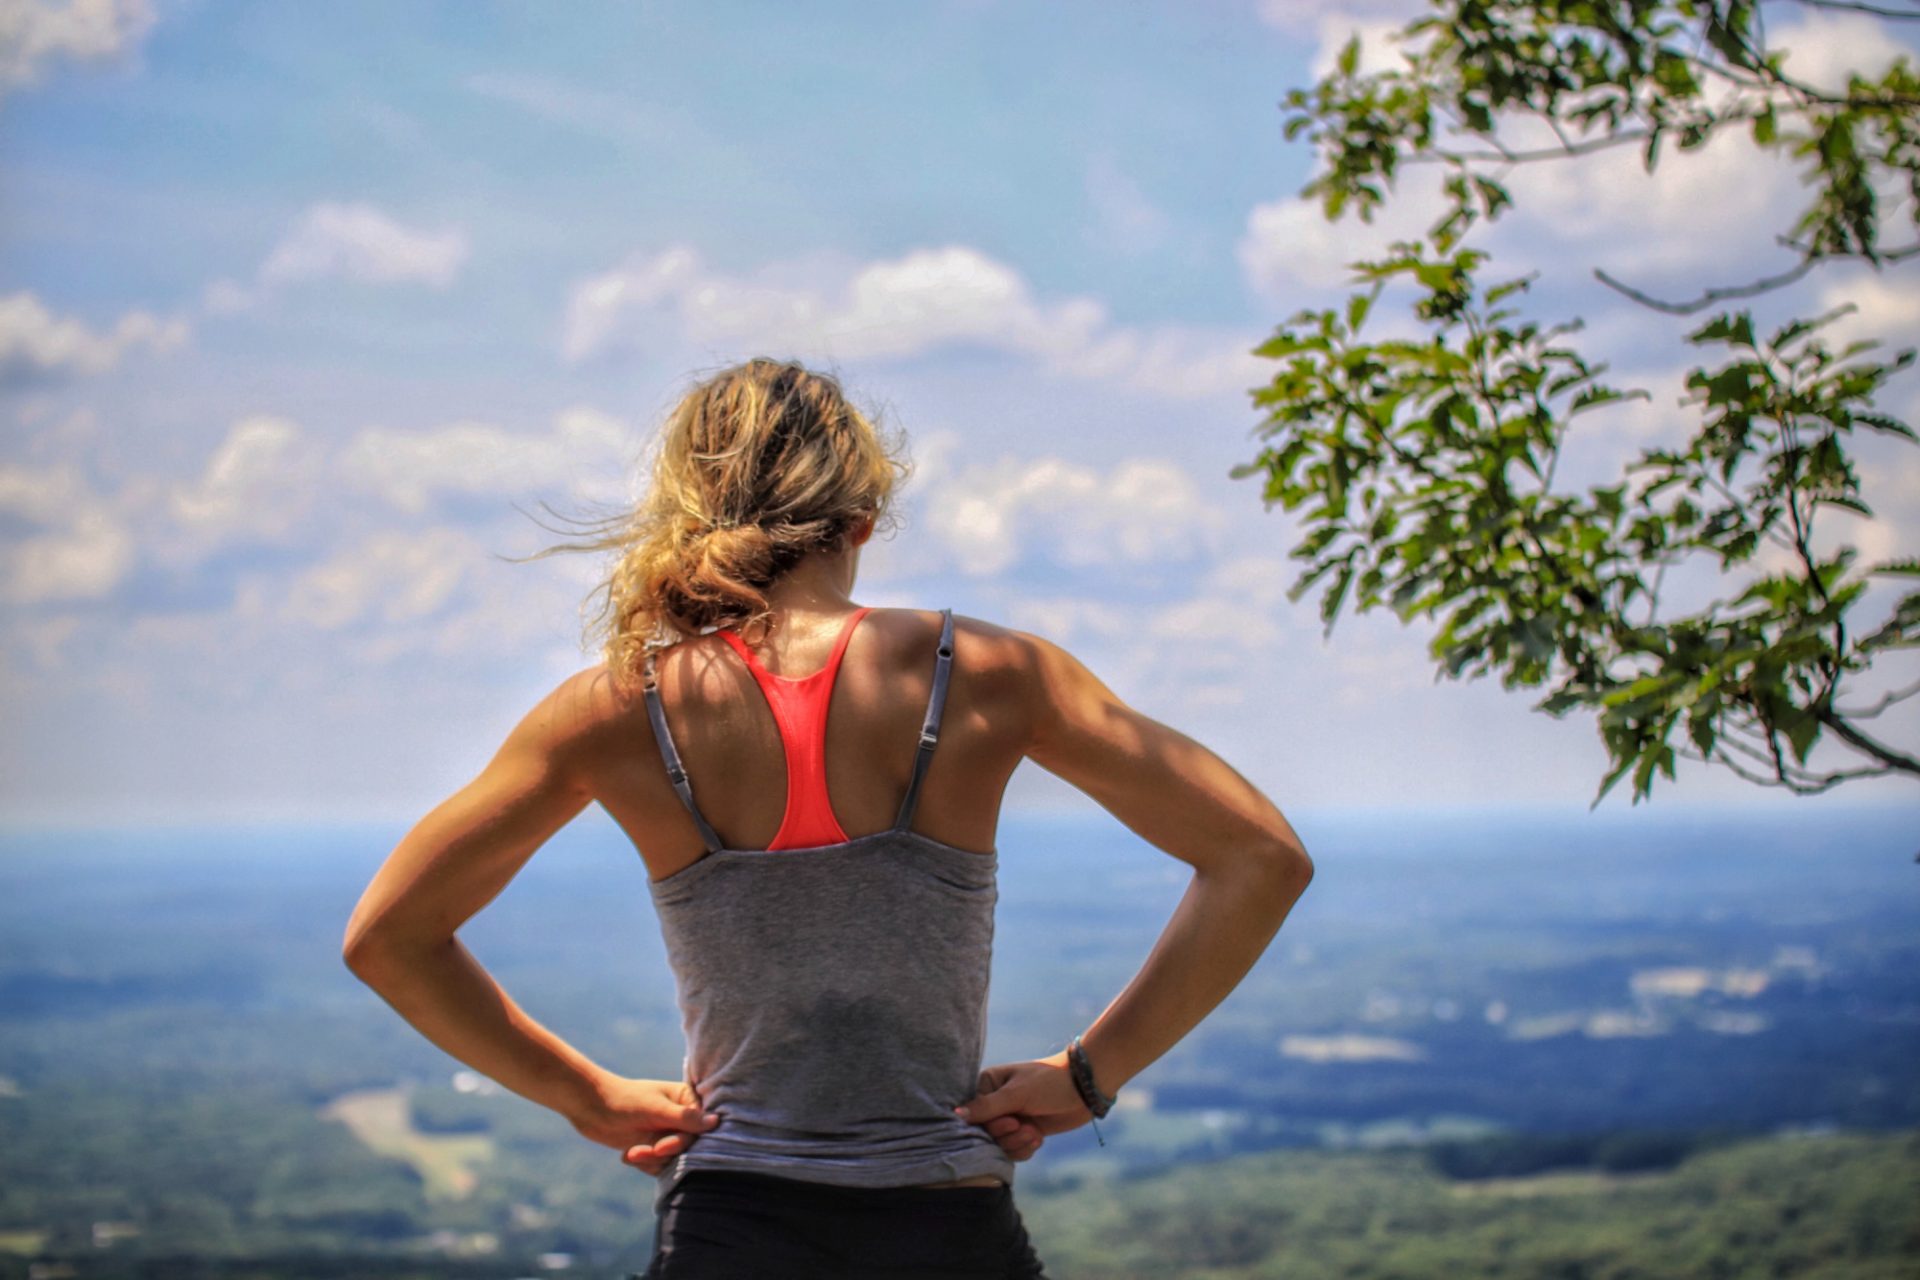 Fit woman looking out over a valley.